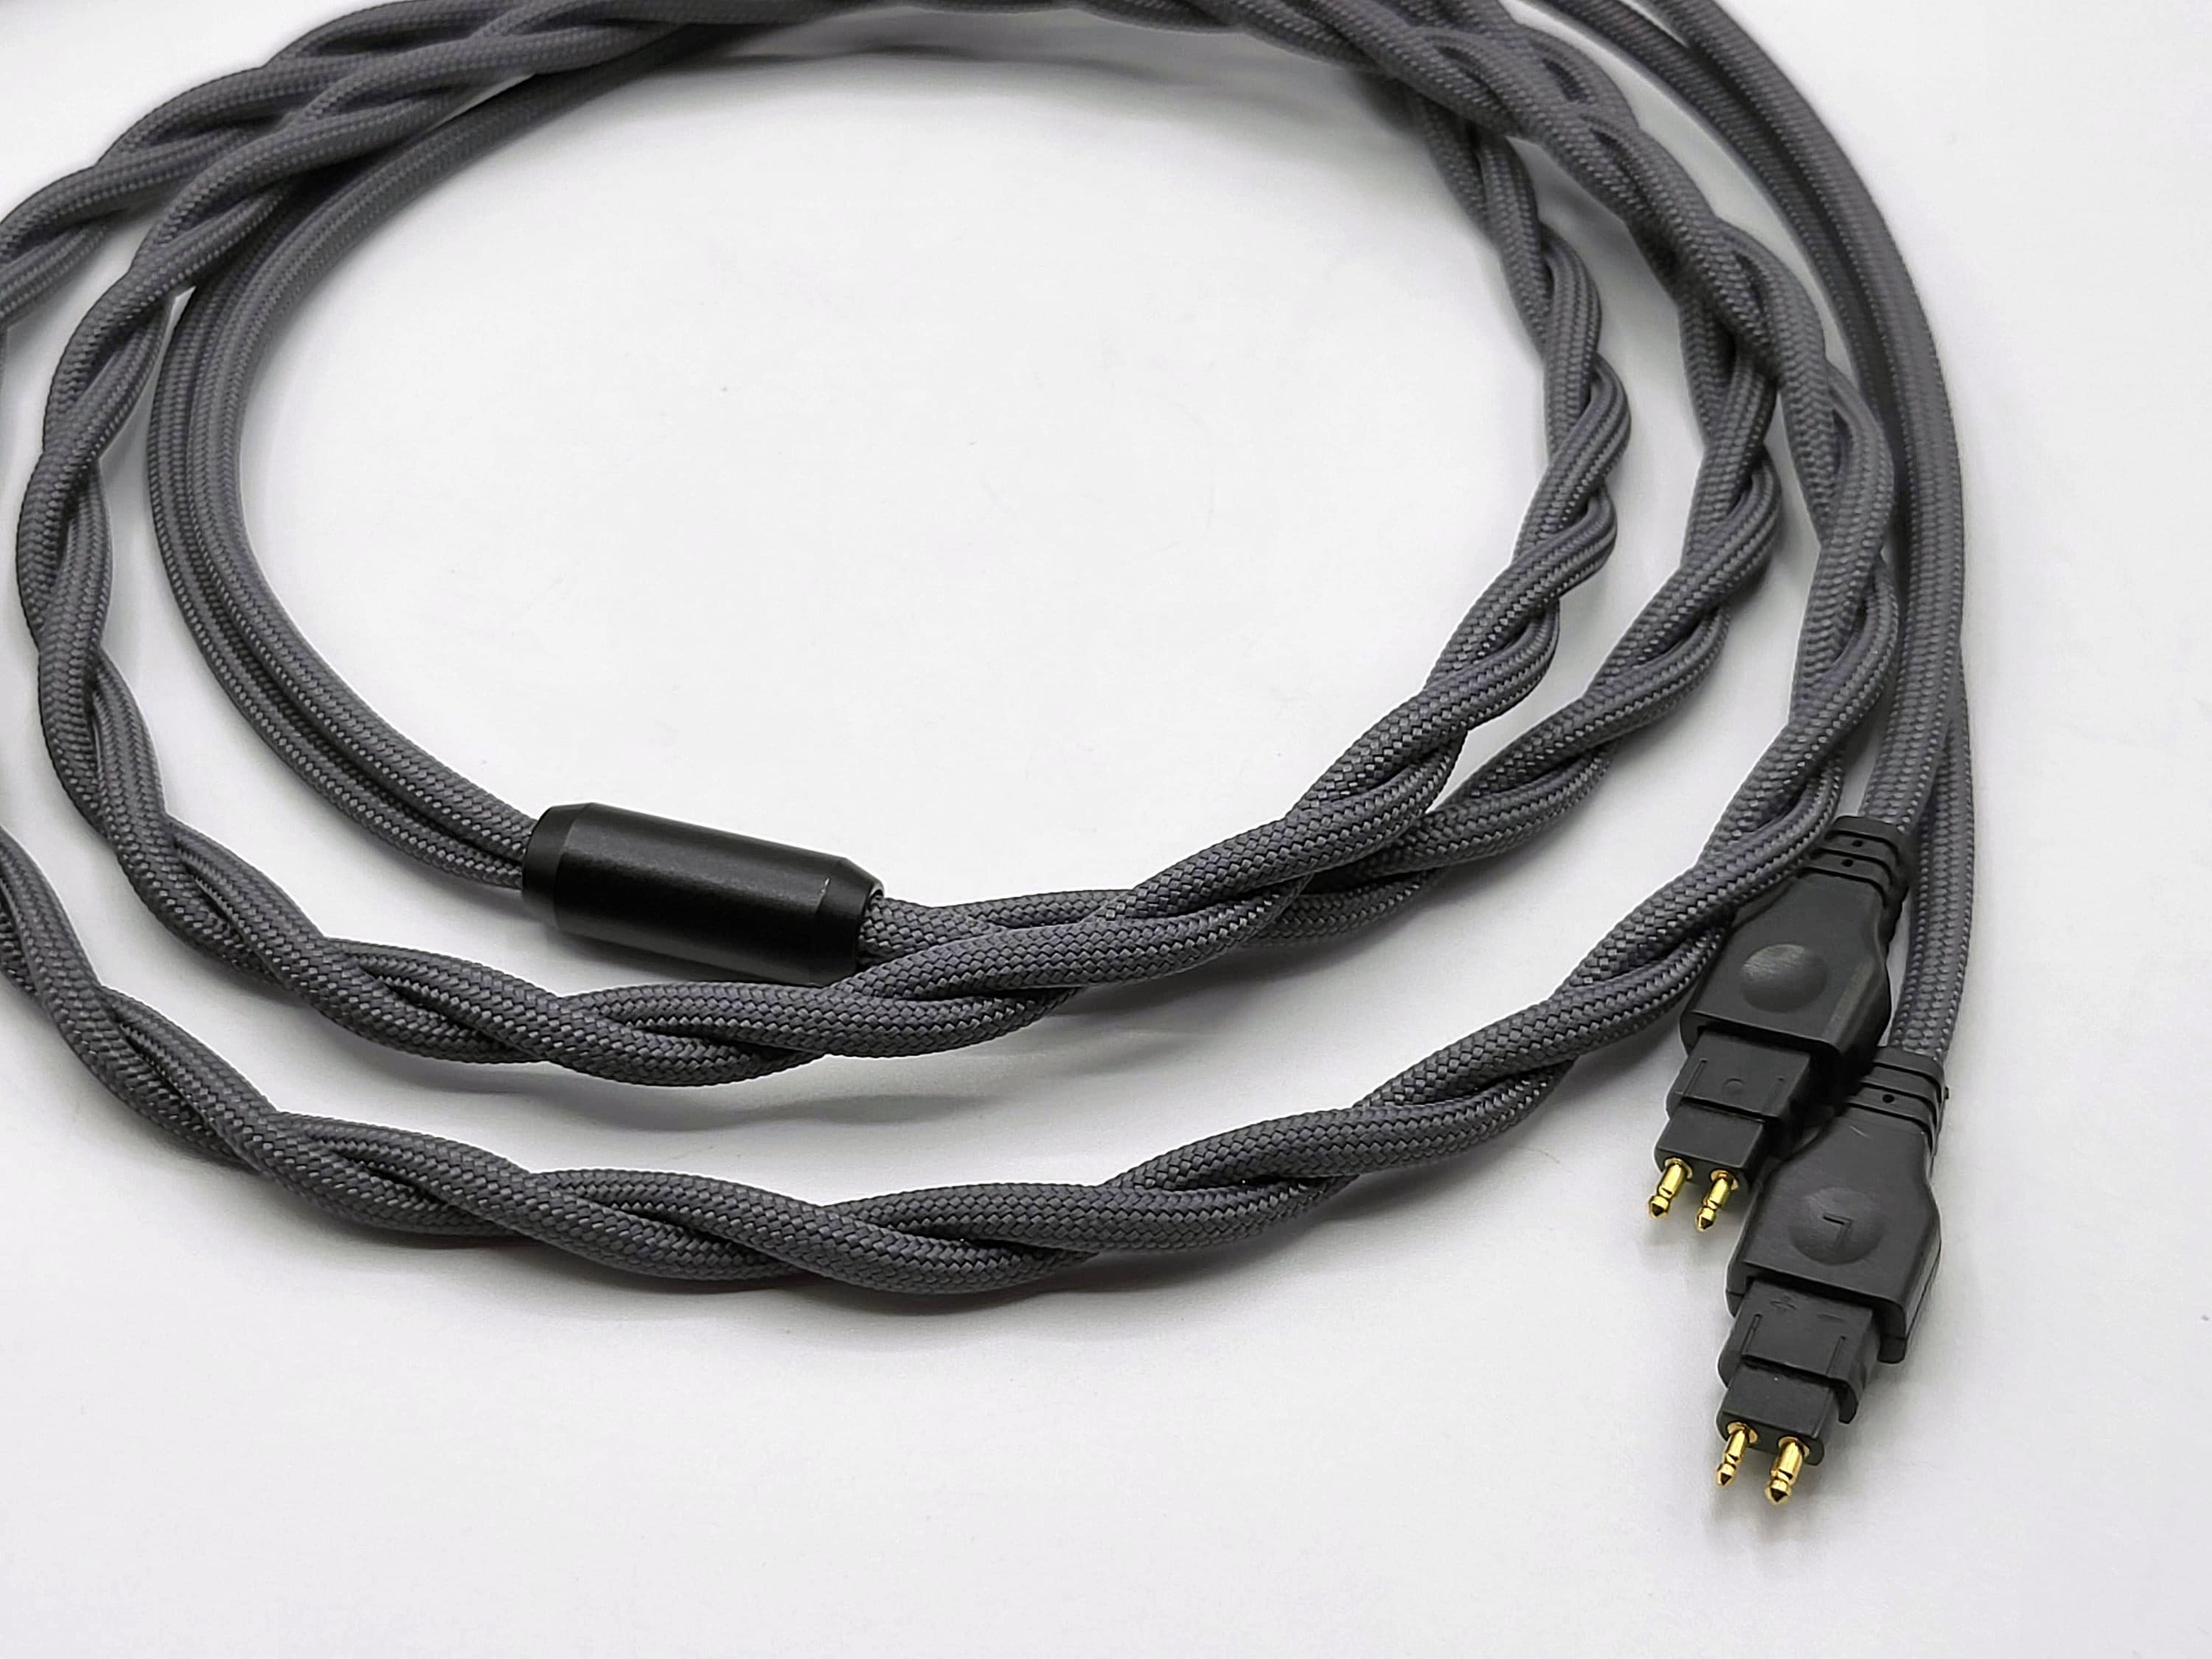 Hd650 Cable - Etsy